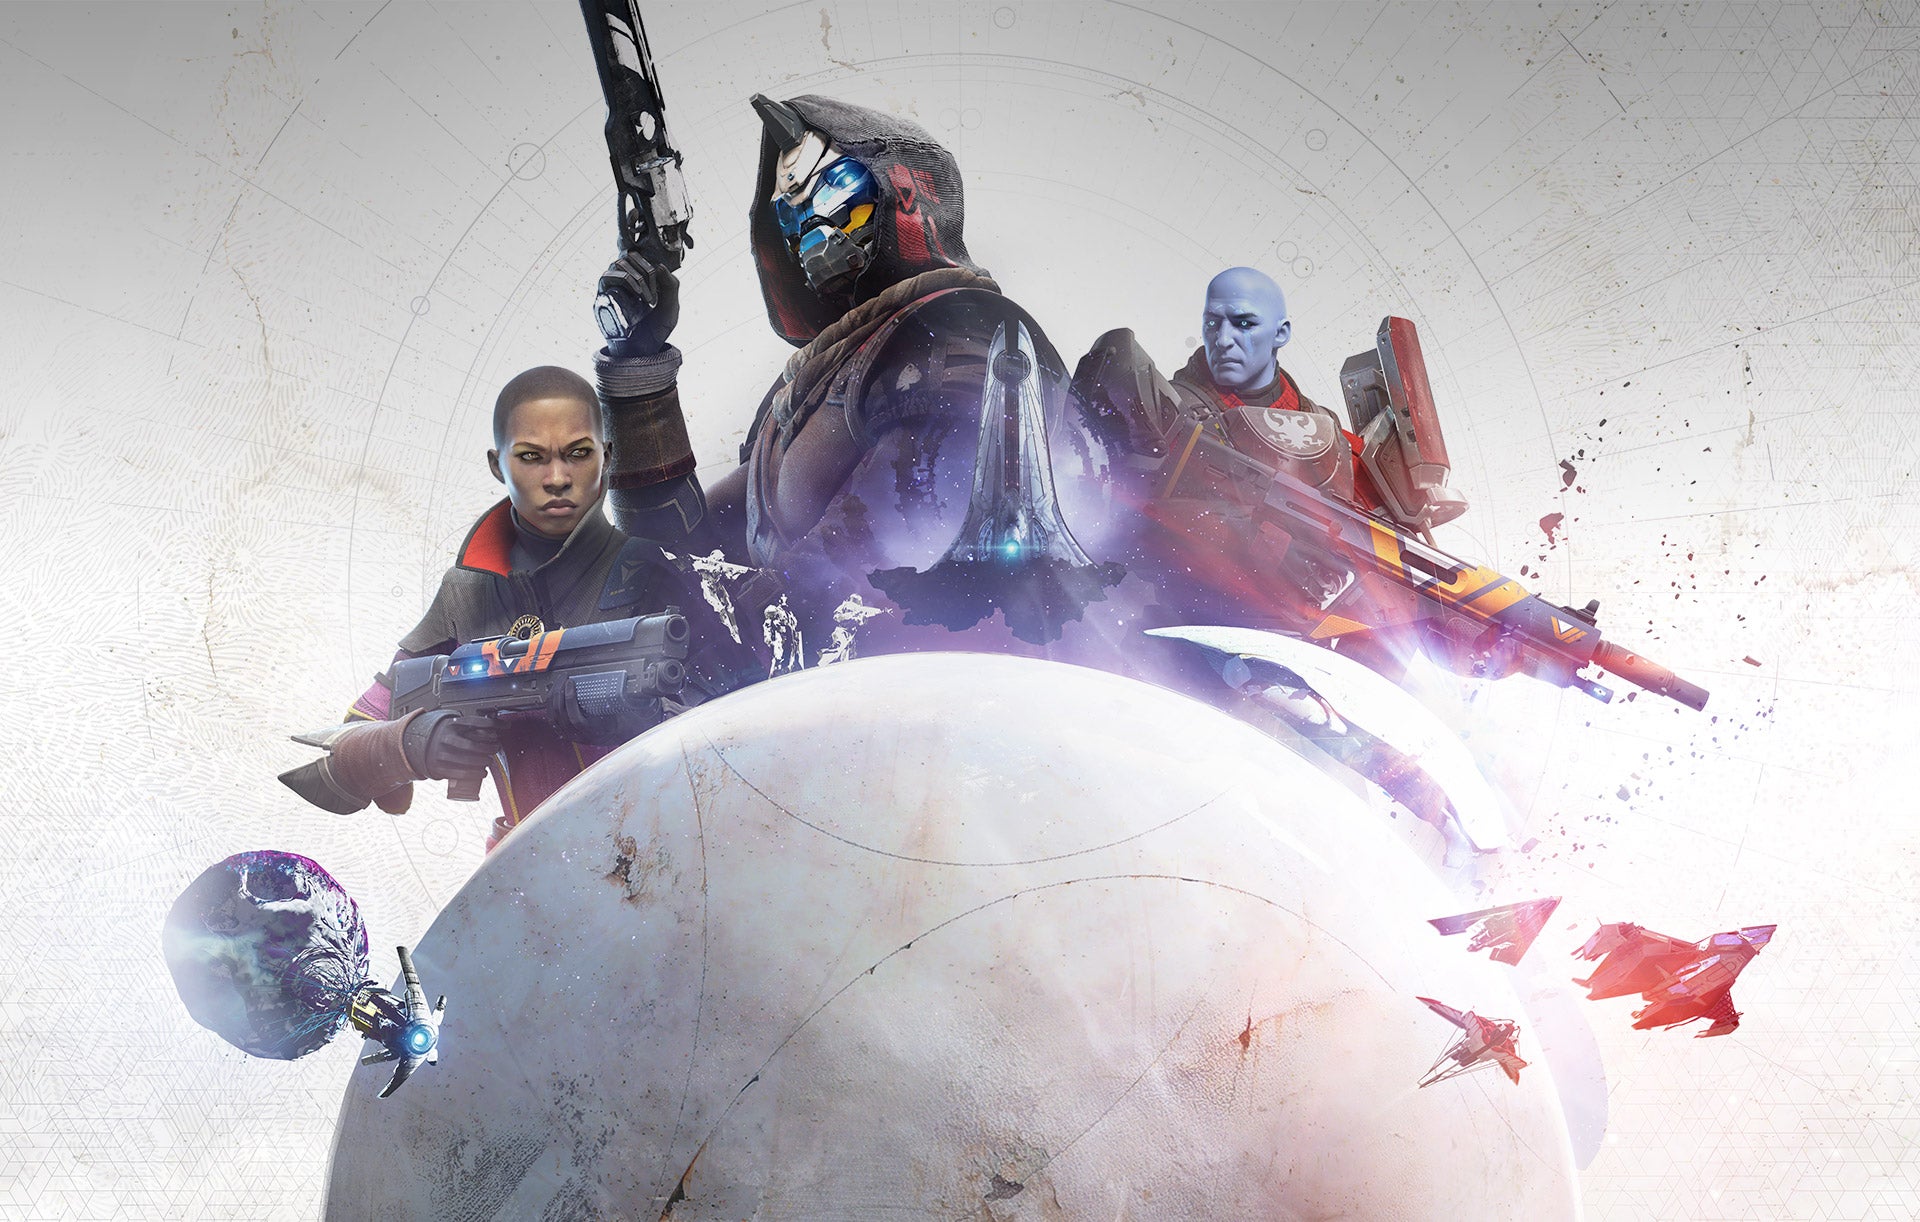 Image for Destiny convention raises $3.7 million for St. Jude's with Bungie support